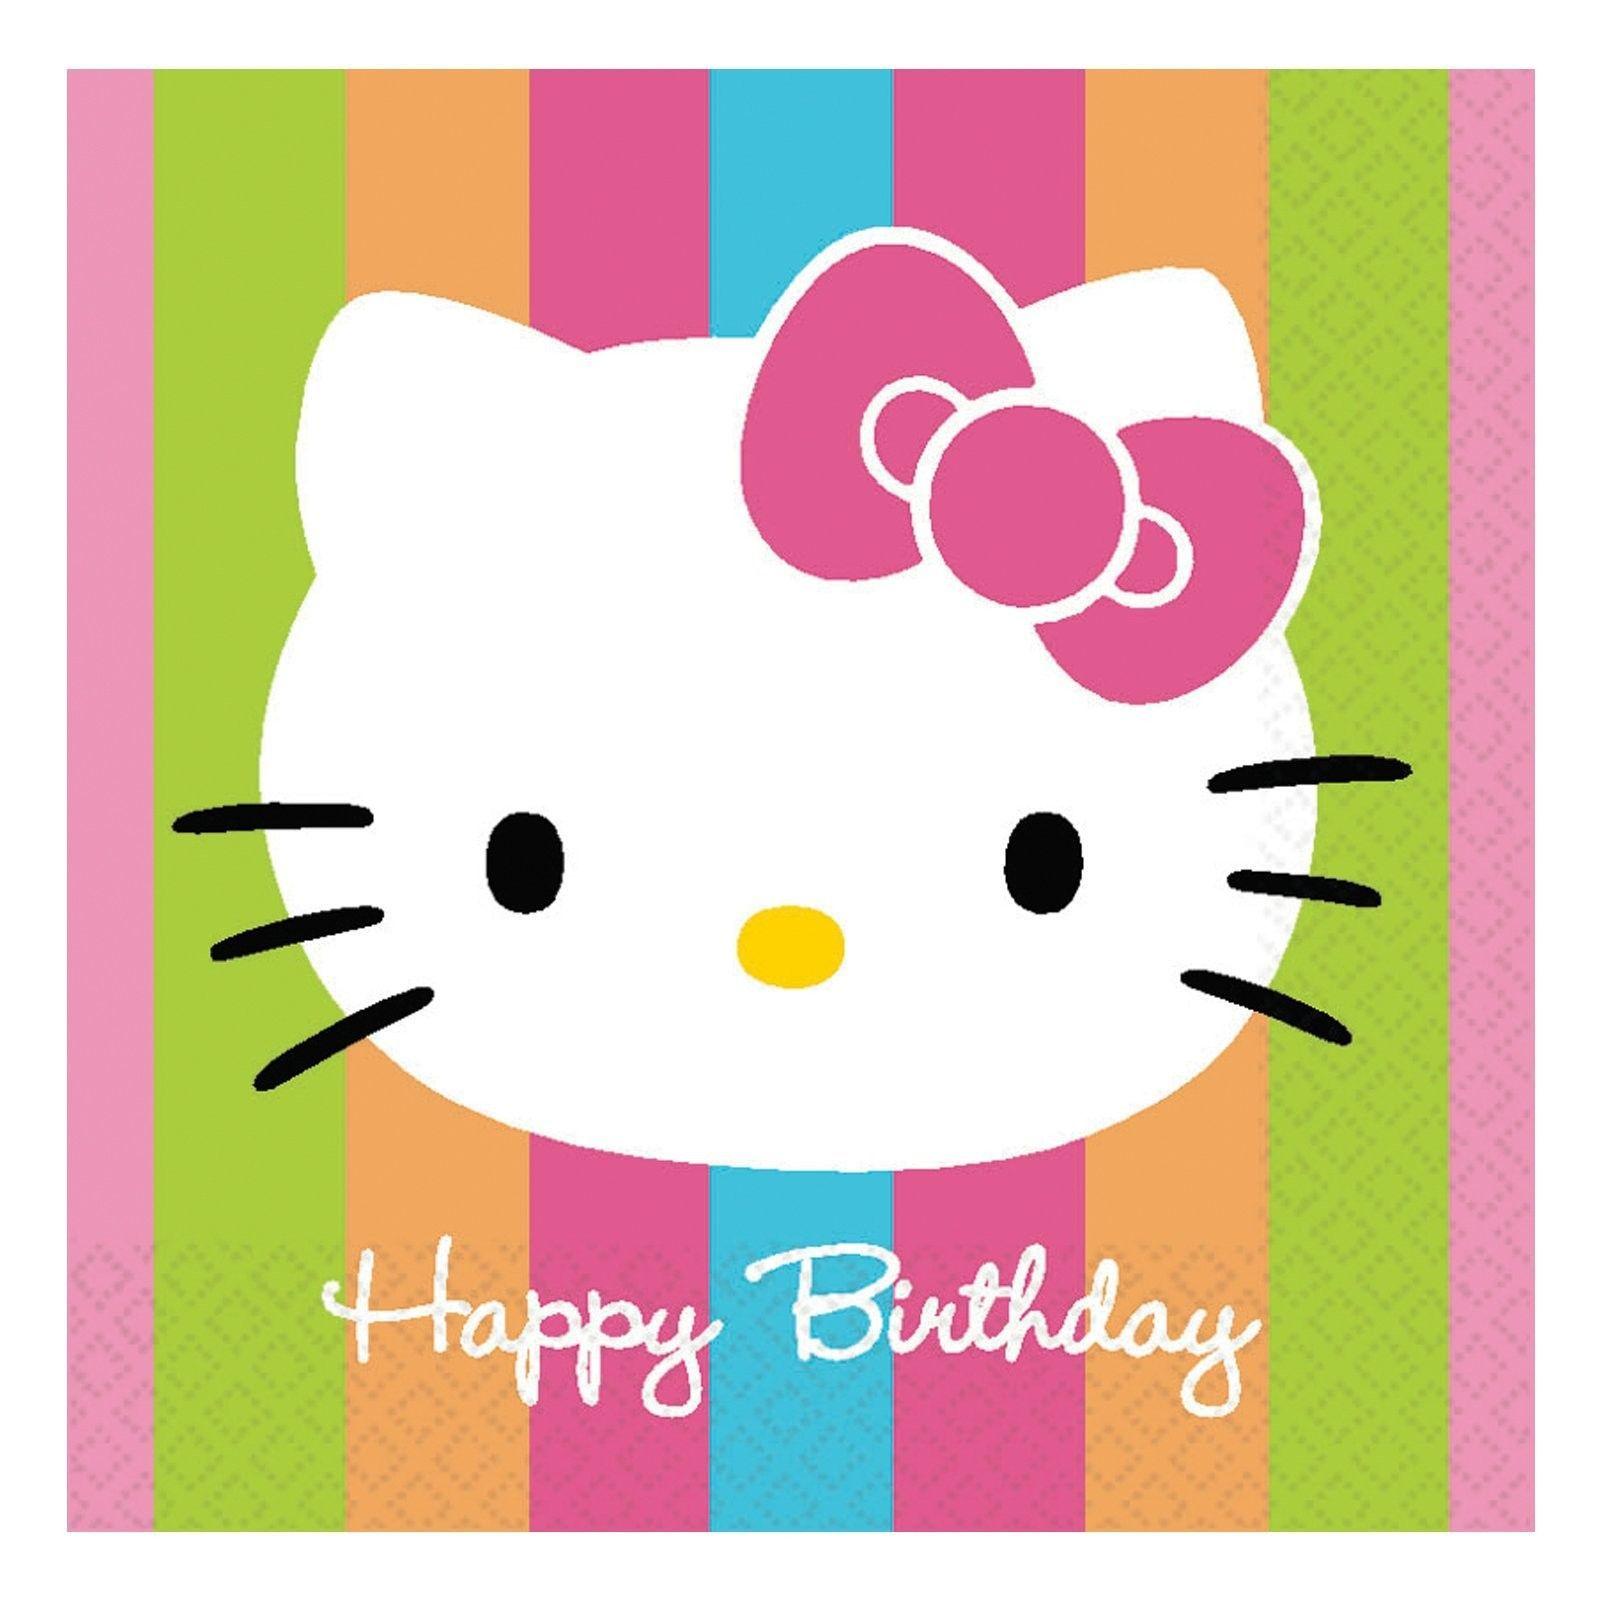 Hello Kitty Wallpaper For Android Free. Large HD Wallpaper Database